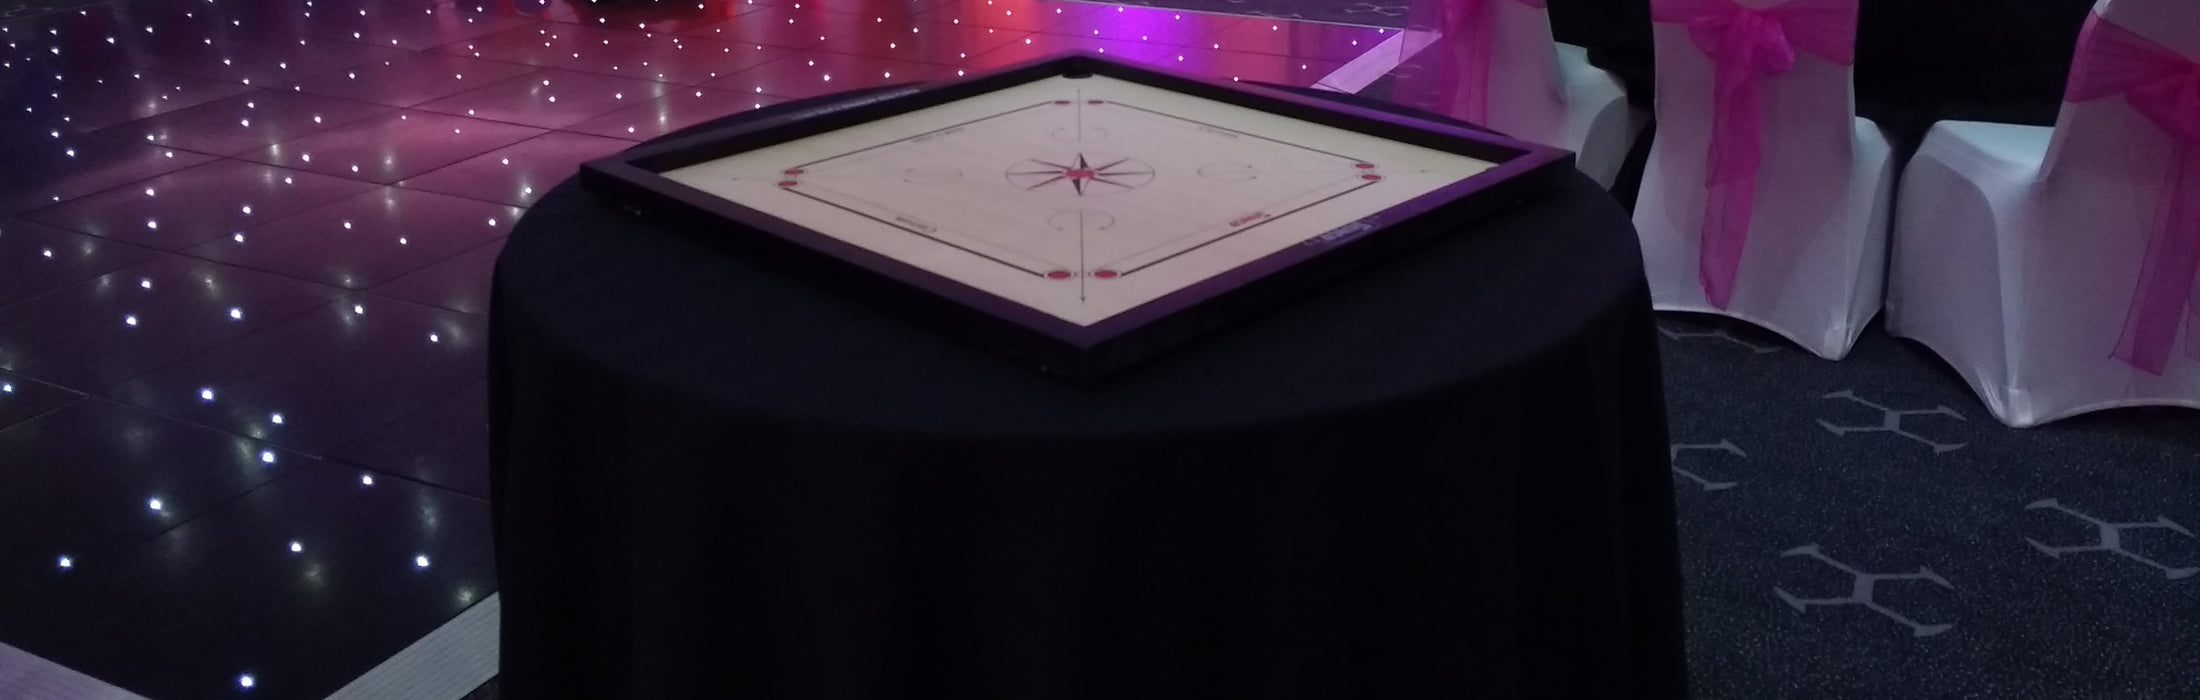 Carrom Board with Accessories